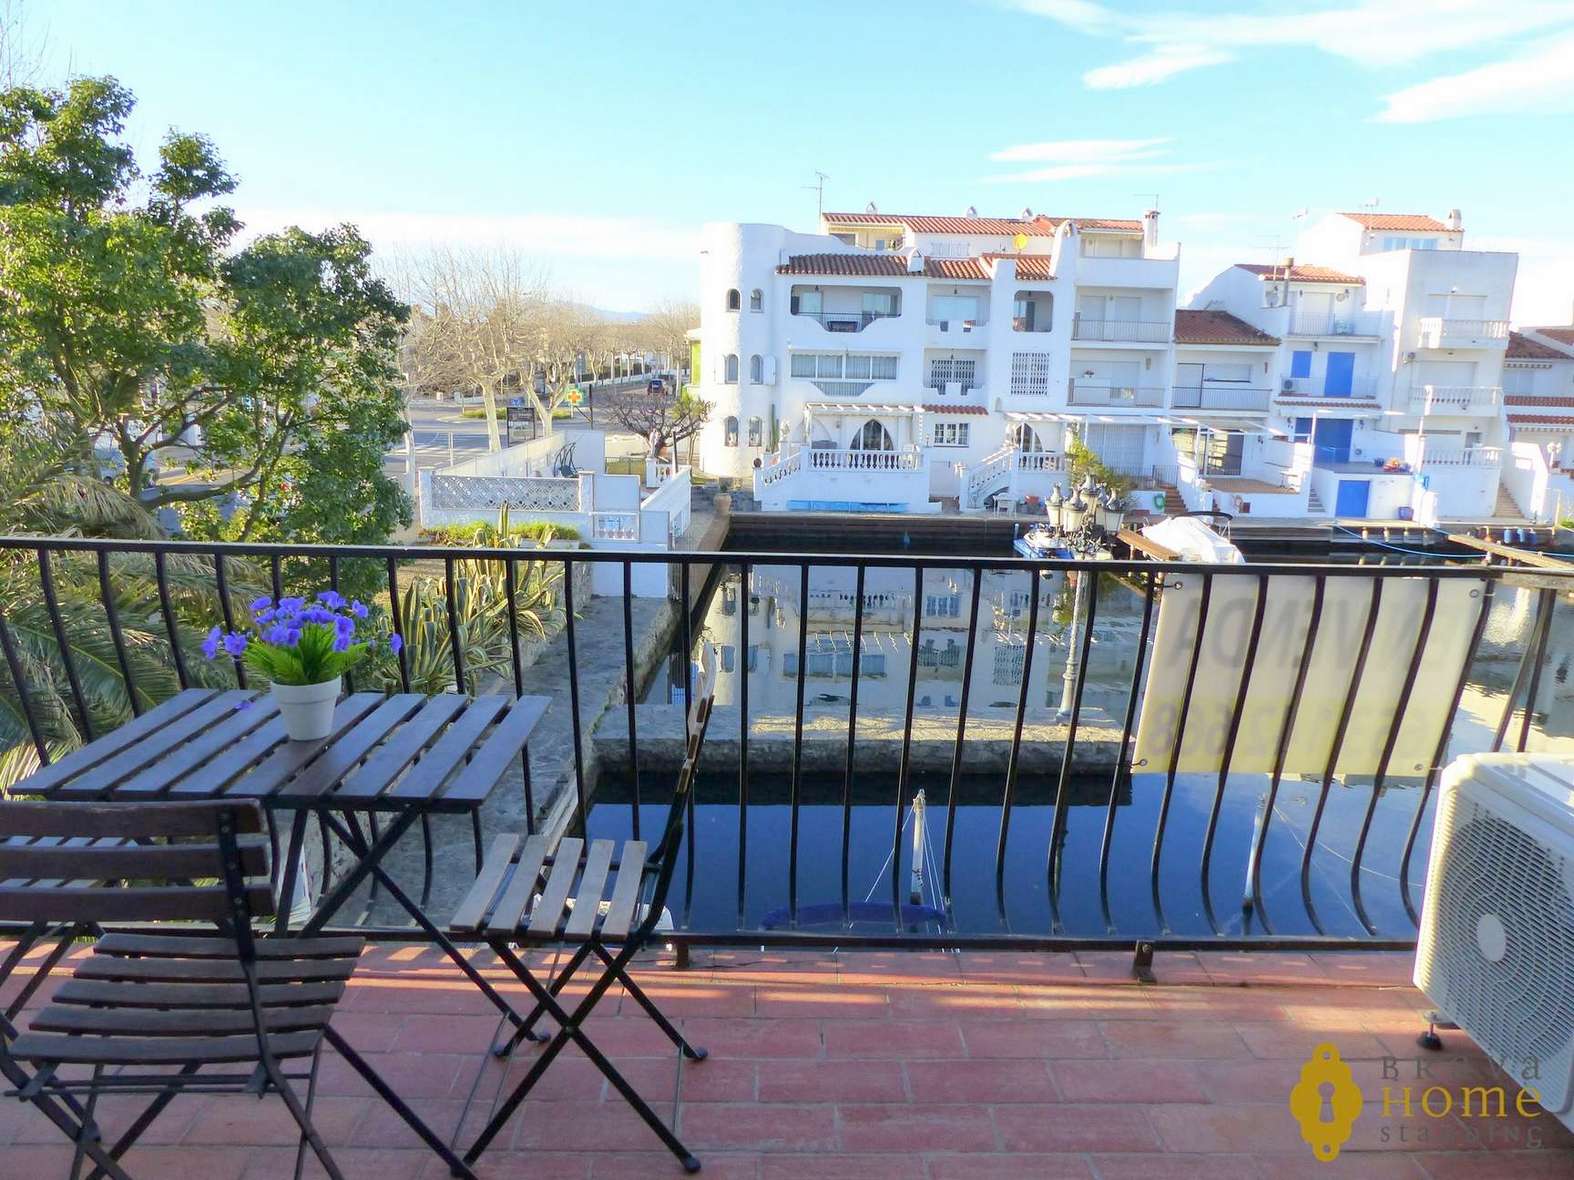 Beautiful apartment overlooking the canal, for sale in Empuriabrava.